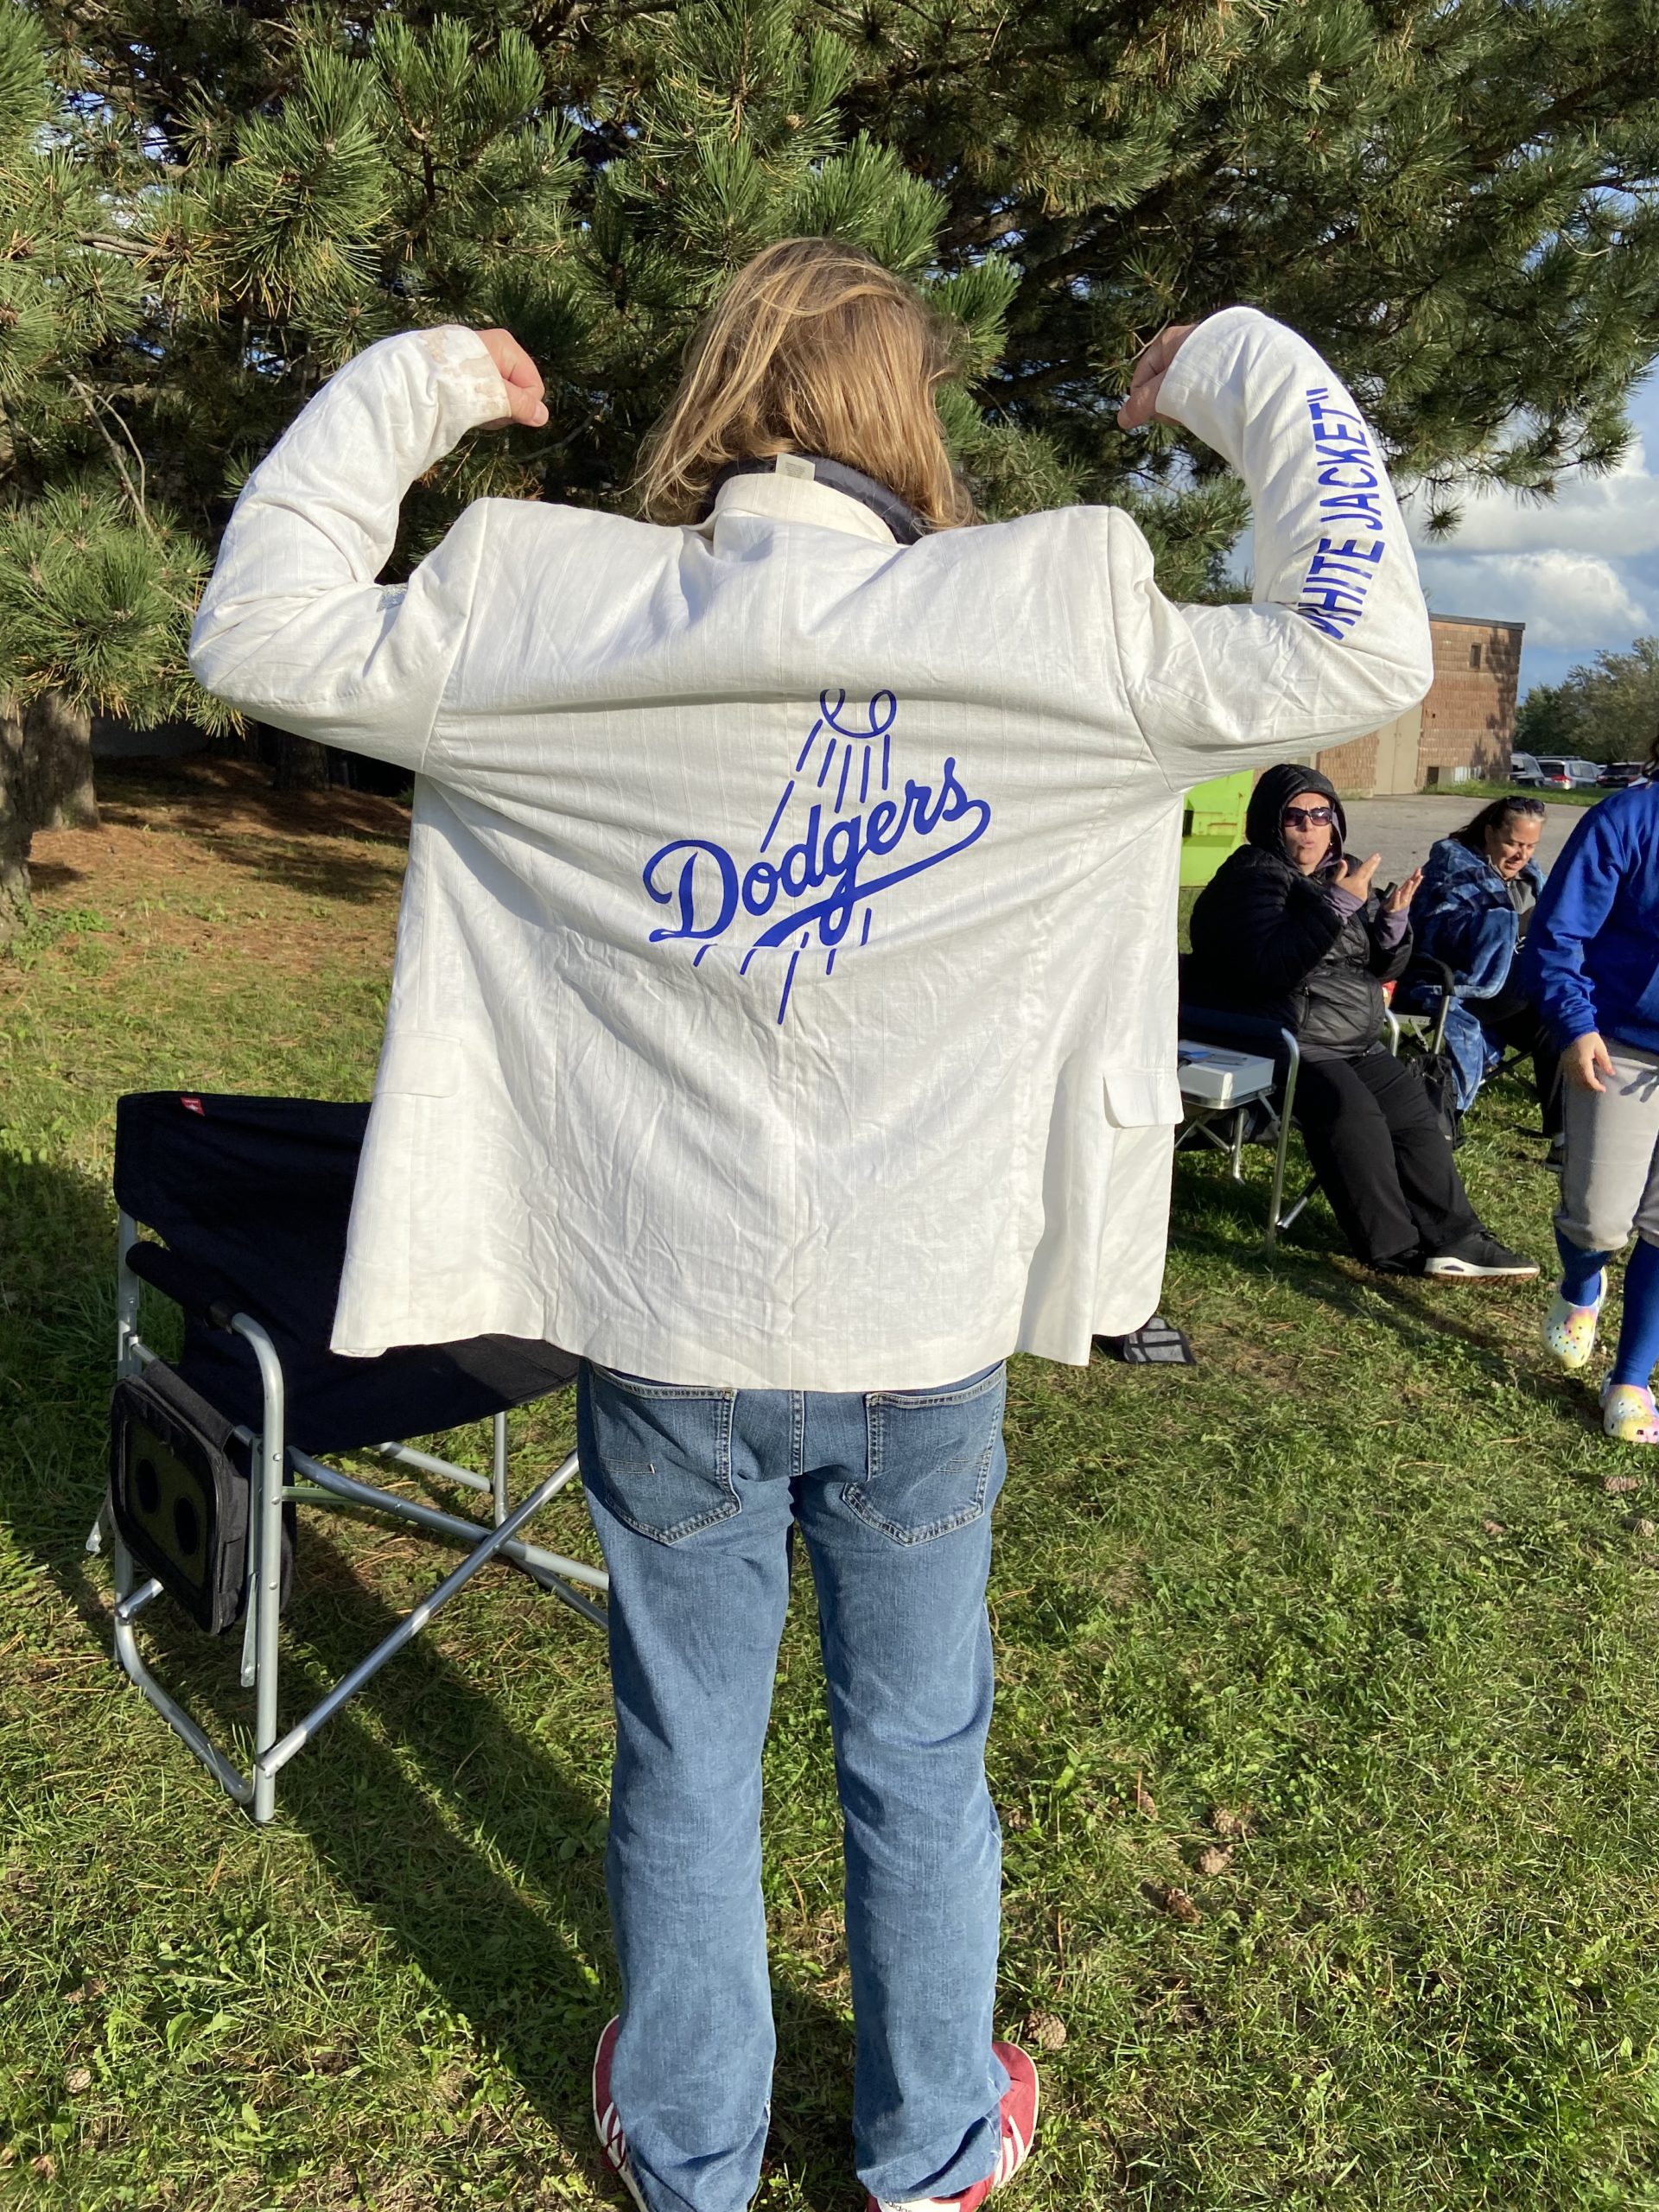 Introducing the White Jacket! - Bytown Dodgers Baseball Club (BDBC)